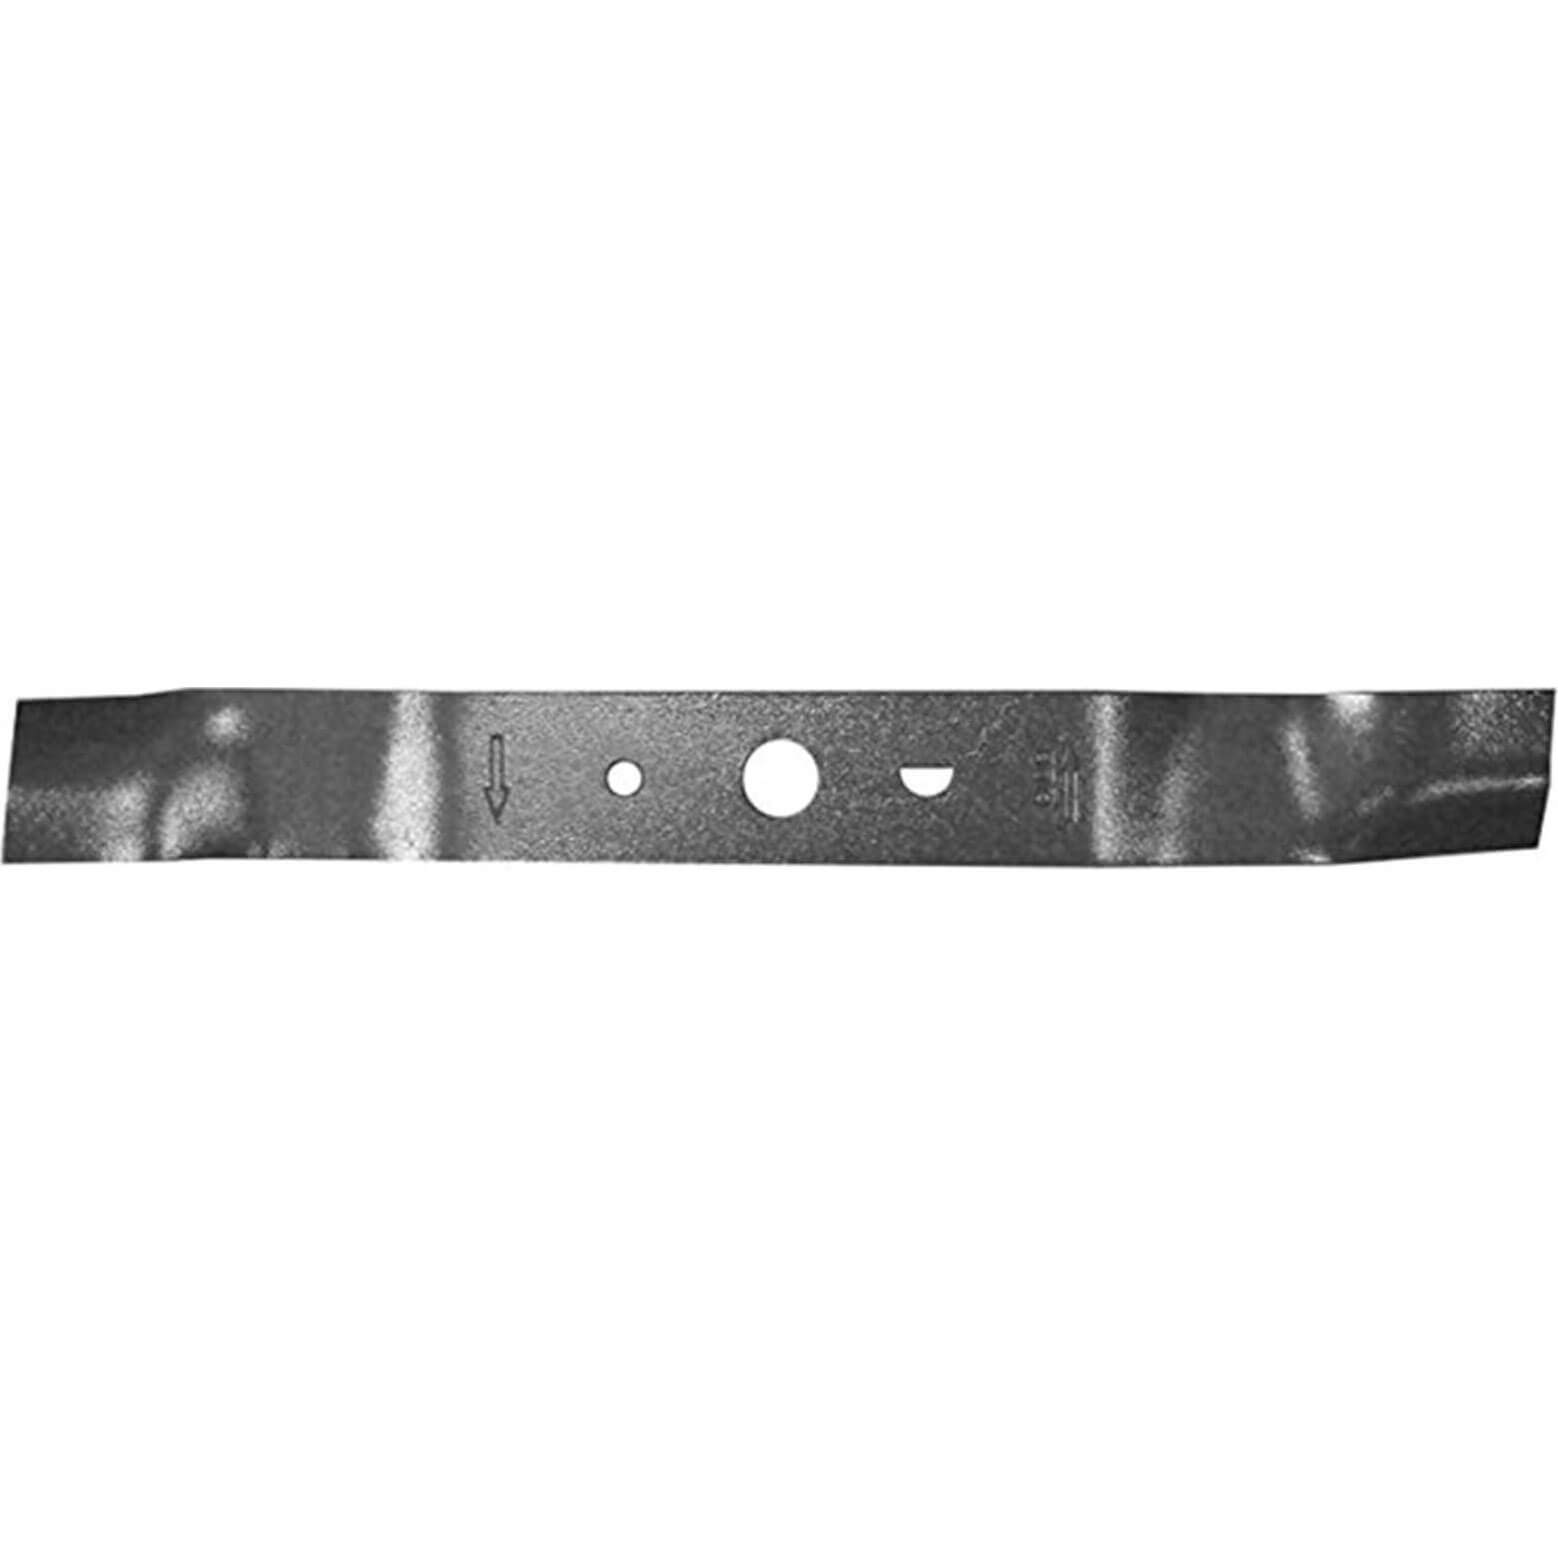 Greenworks Genuine Lawnmower Blade for G40LM35 Pack of 1